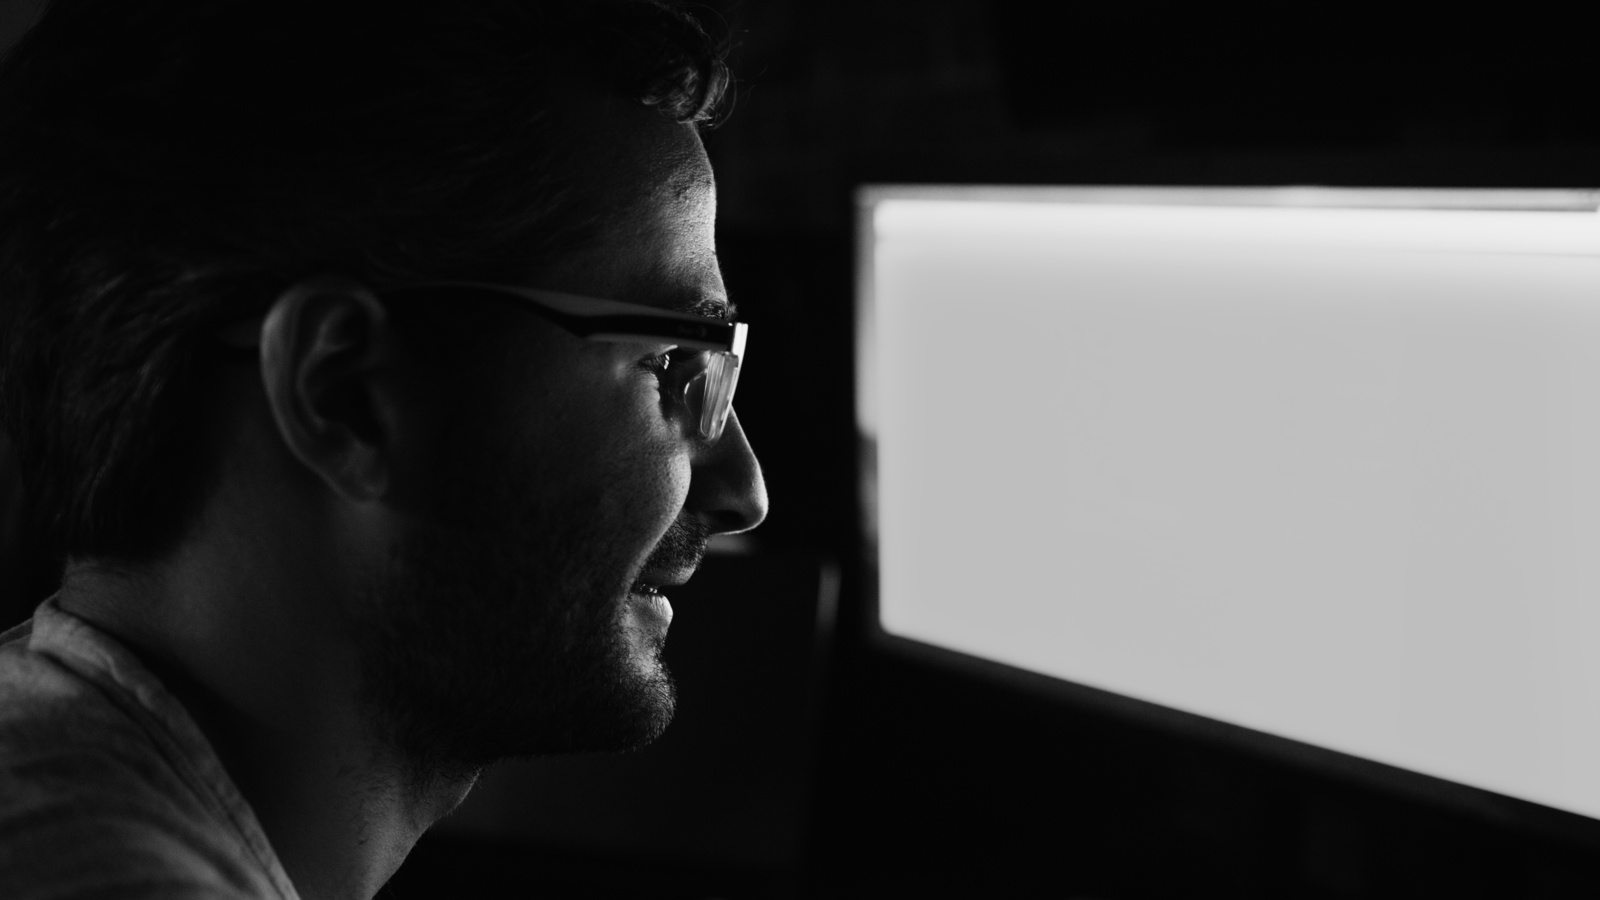 Black and white side profile of man working on a computer